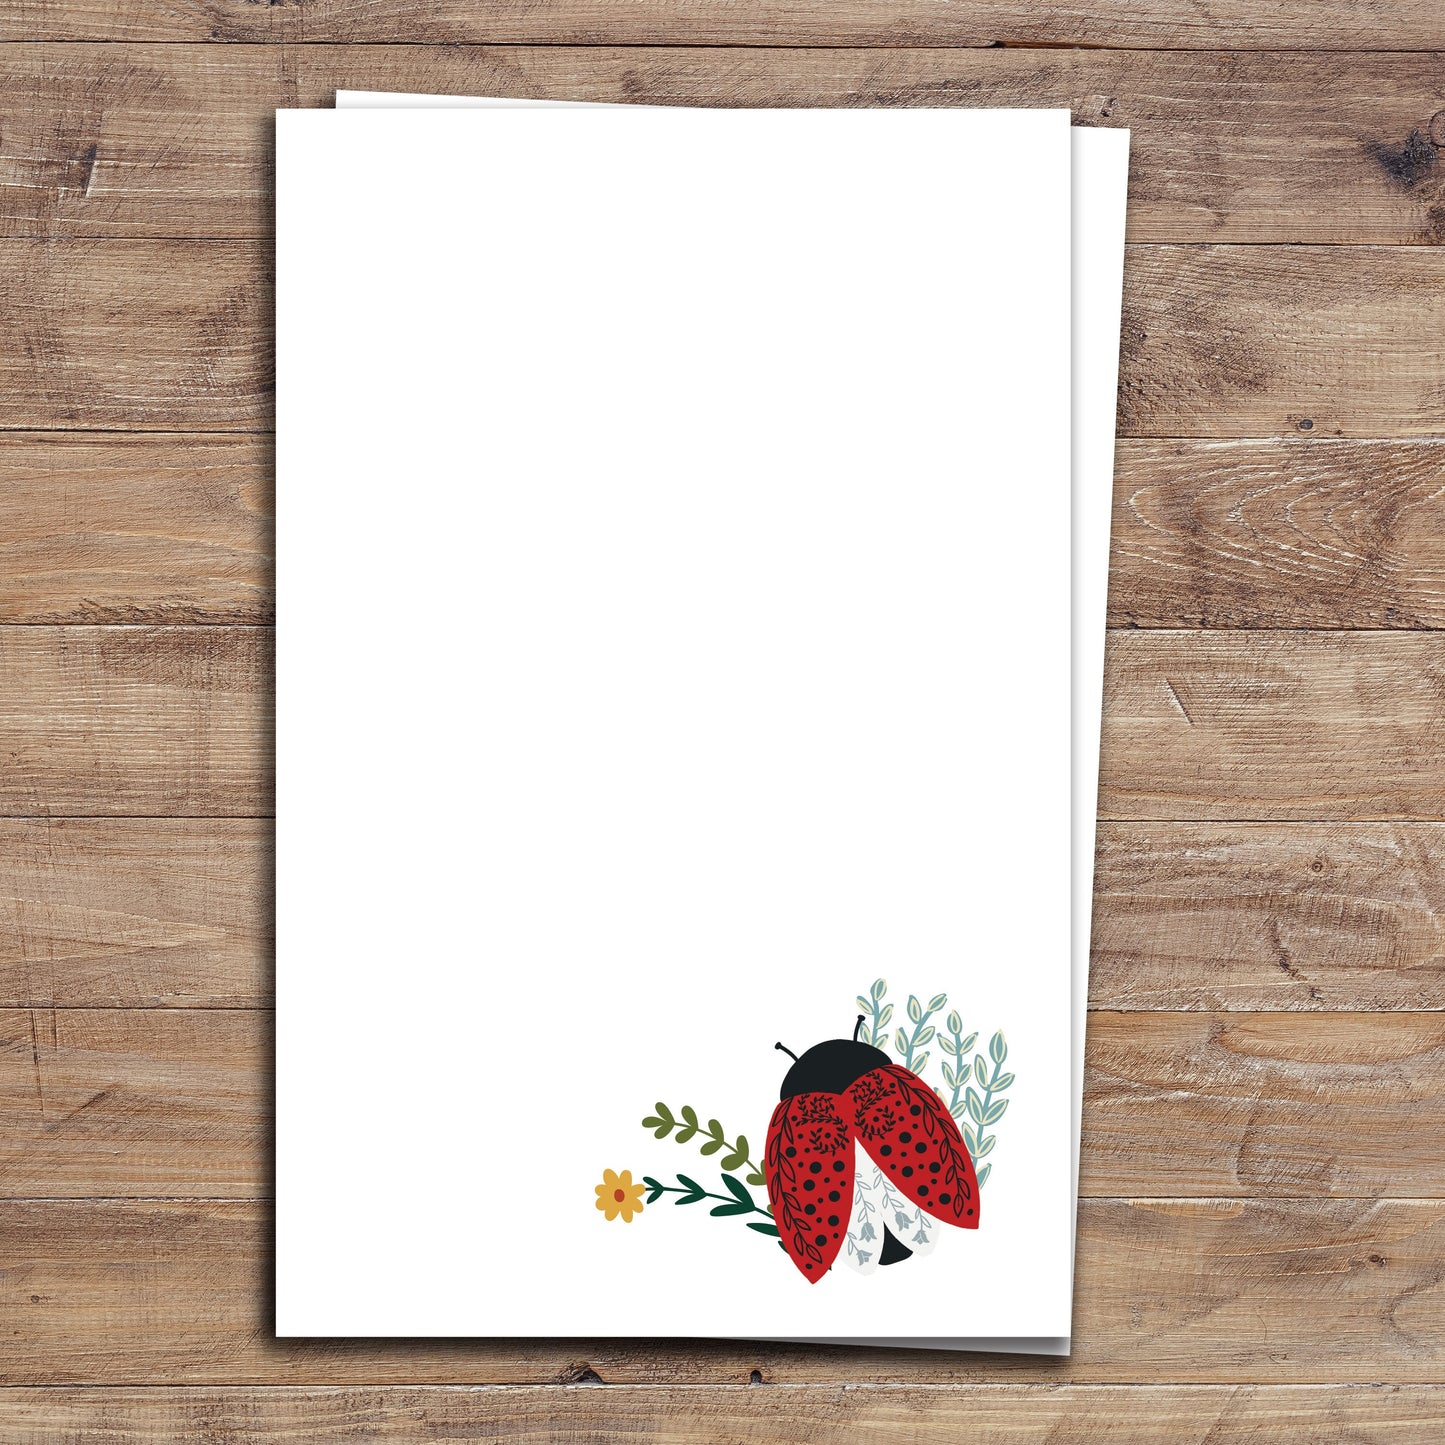 Two Floral Ladybug notepads on wood background